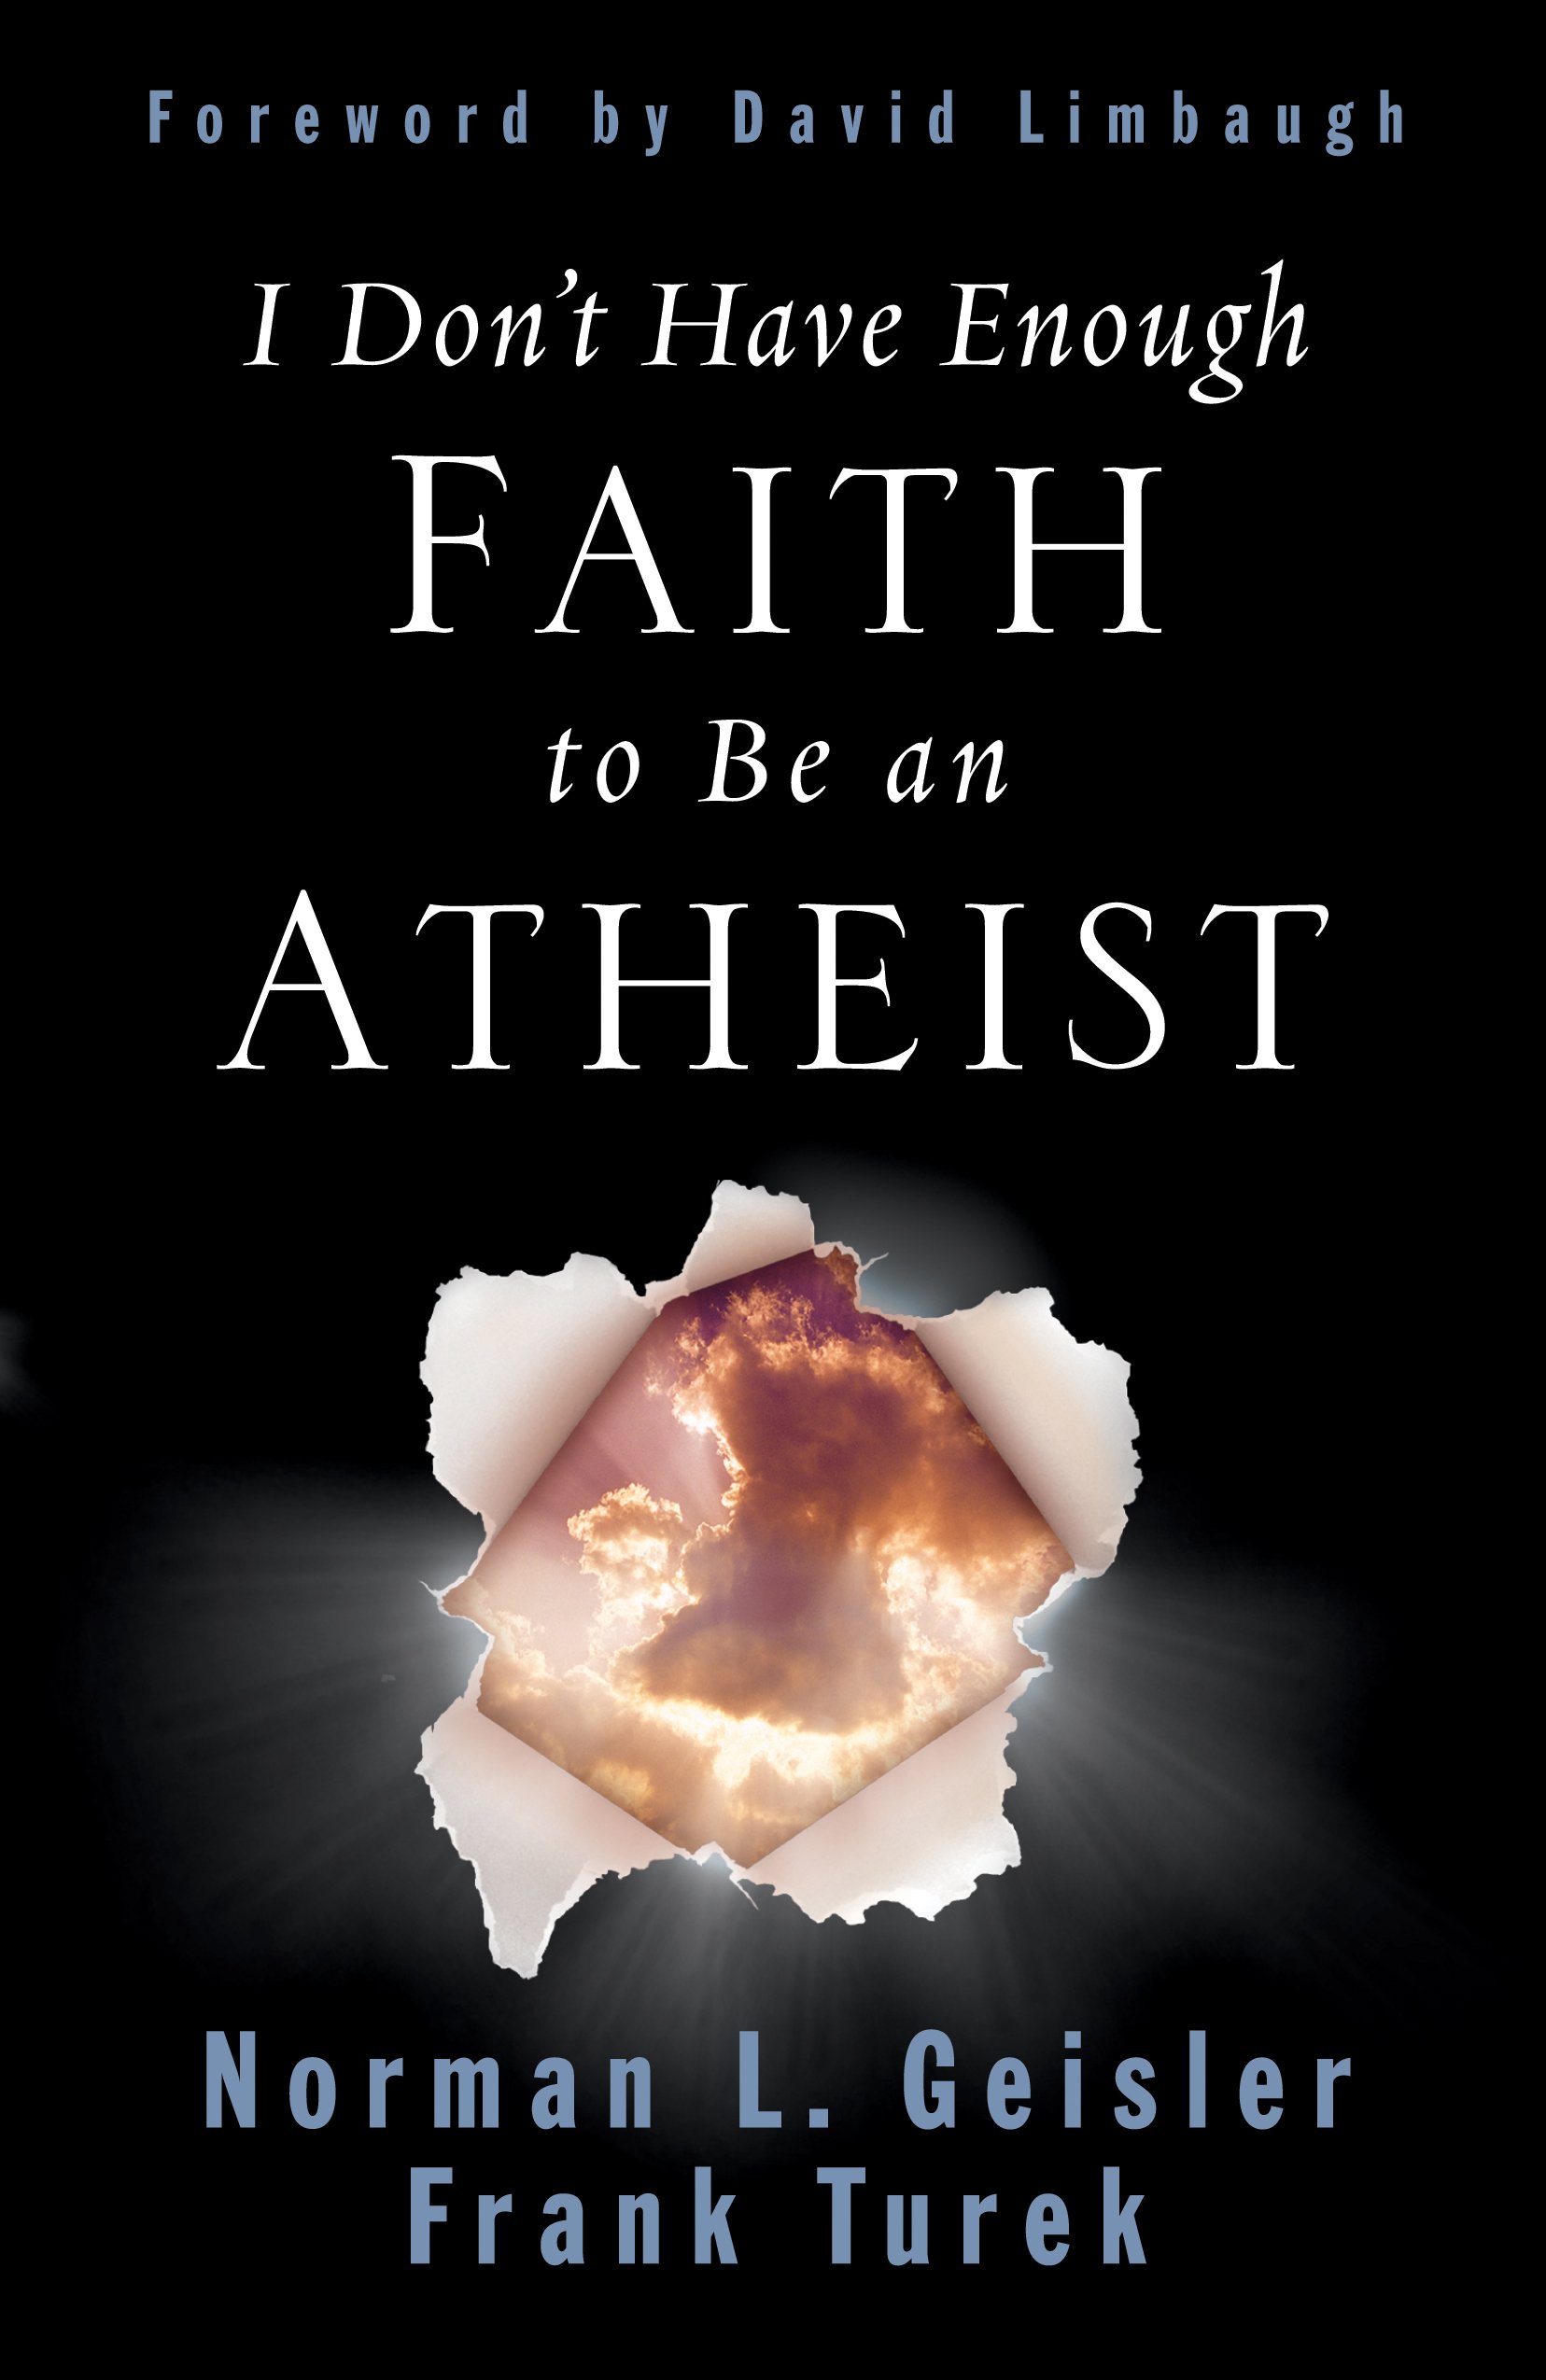 I Don’t Have Enough Faith to Be an Atheist by Norman L. Geisler and Frank Turek.